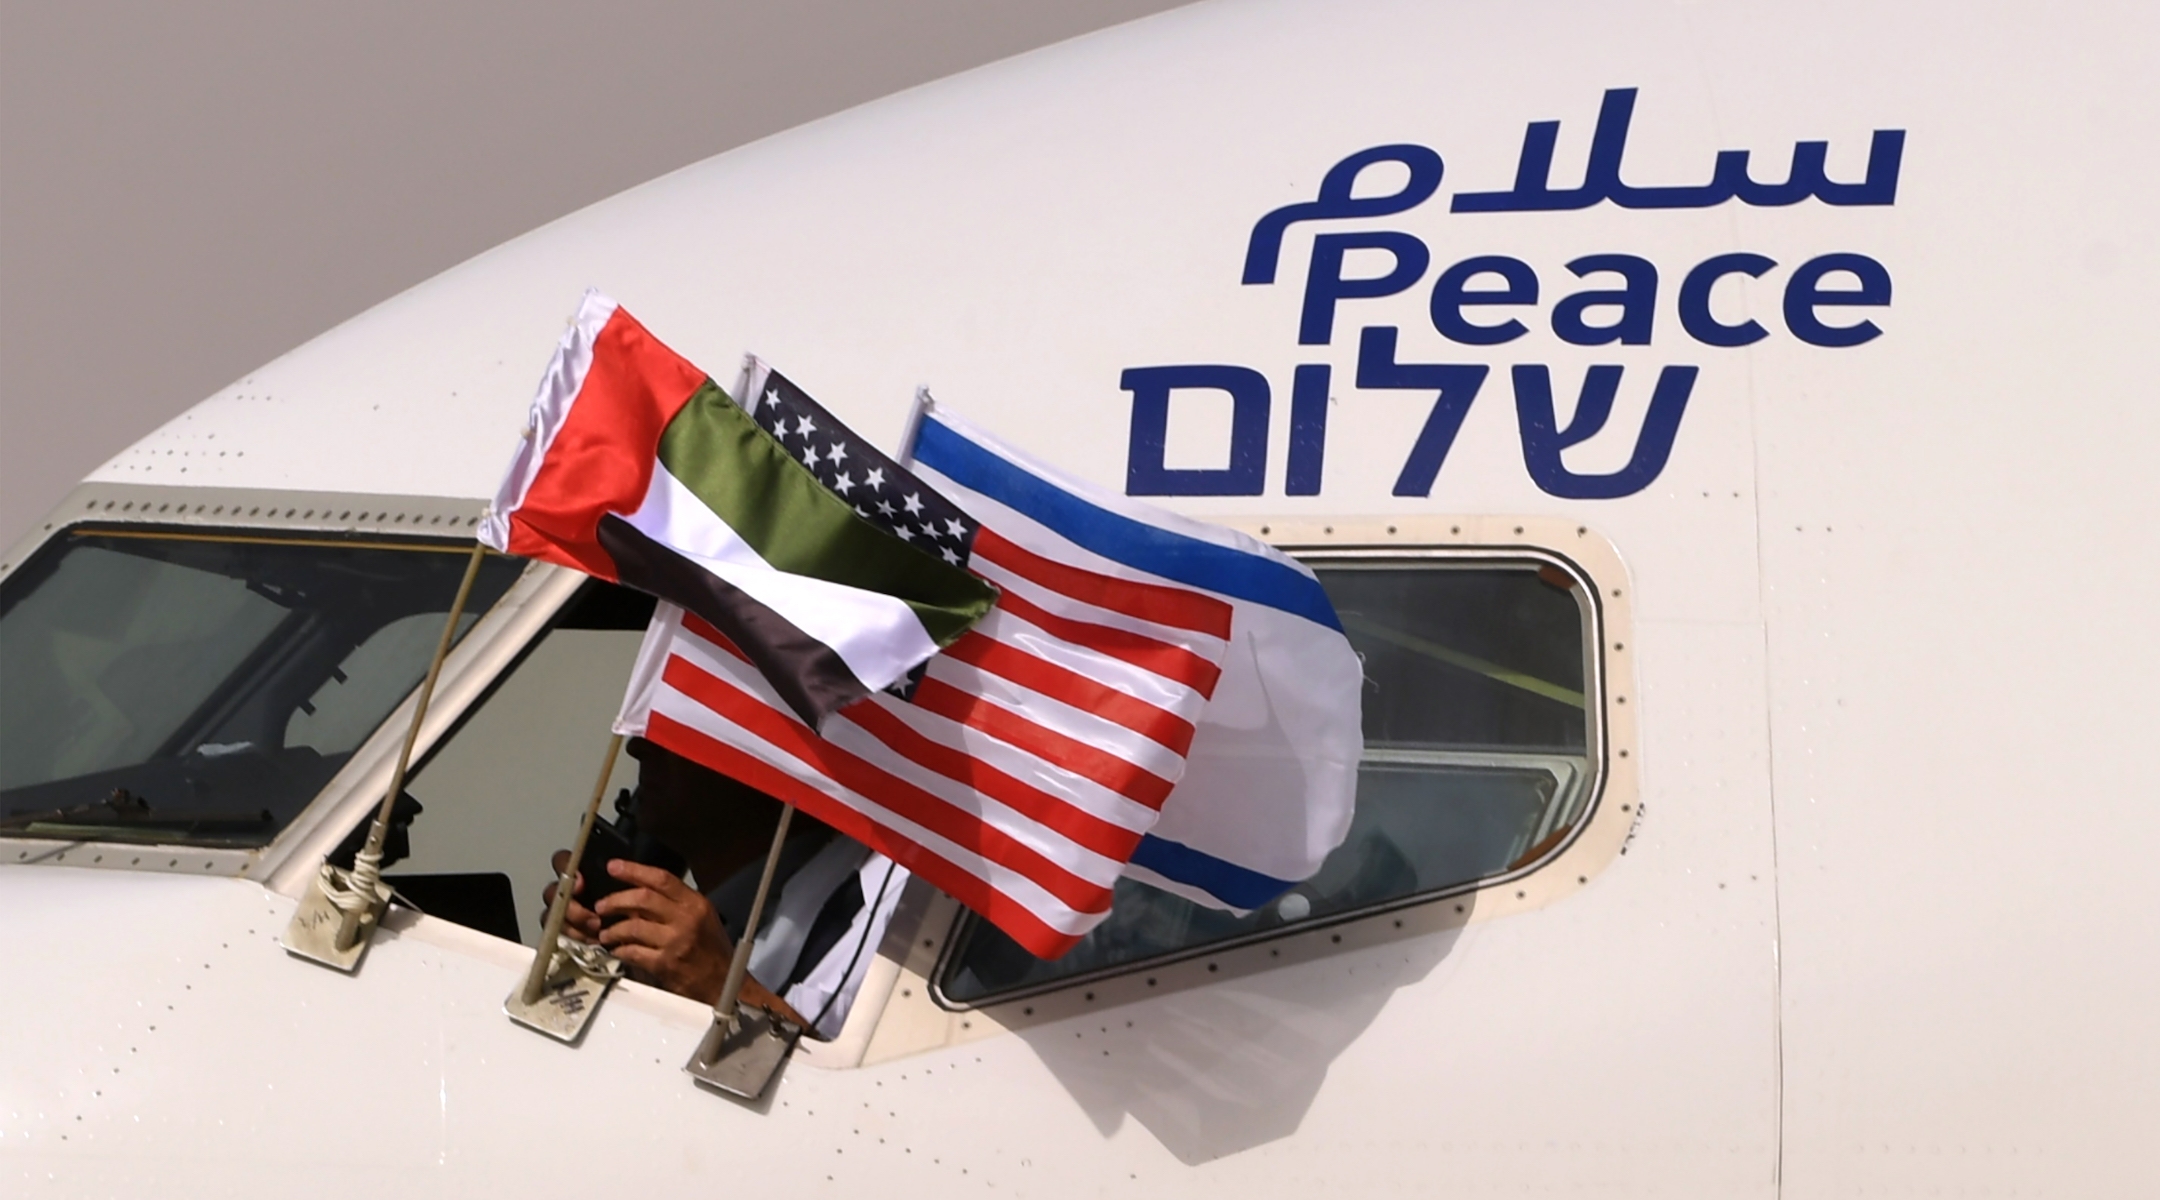 An Israeli El Al airplane flying the flags of Israel, the United Arab Emirates and the United States, and bearing the word "peace" in Arabic, English and Hebrew, arrives at the Abu Dhabi airport after flying from Tel Aviv on August 31, 2020. (Karim Sahib/AFP via Getty Images)